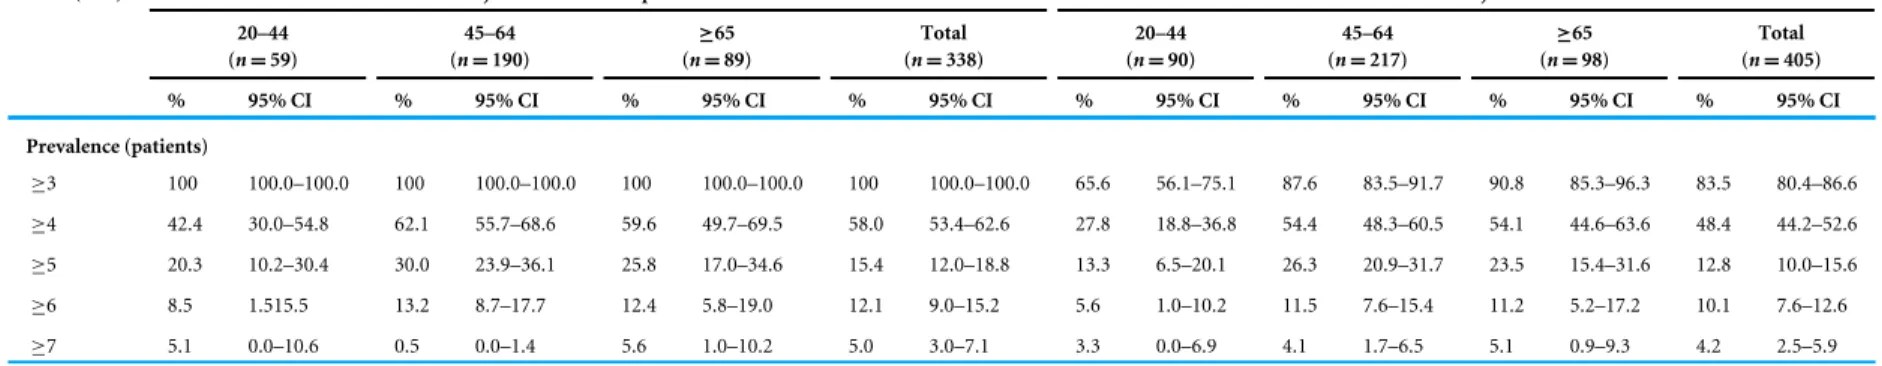 Table 3 Percentage of patients, with 95% confidence interval (95% CI), by threshold of CAL (mm), severity and age group (years).